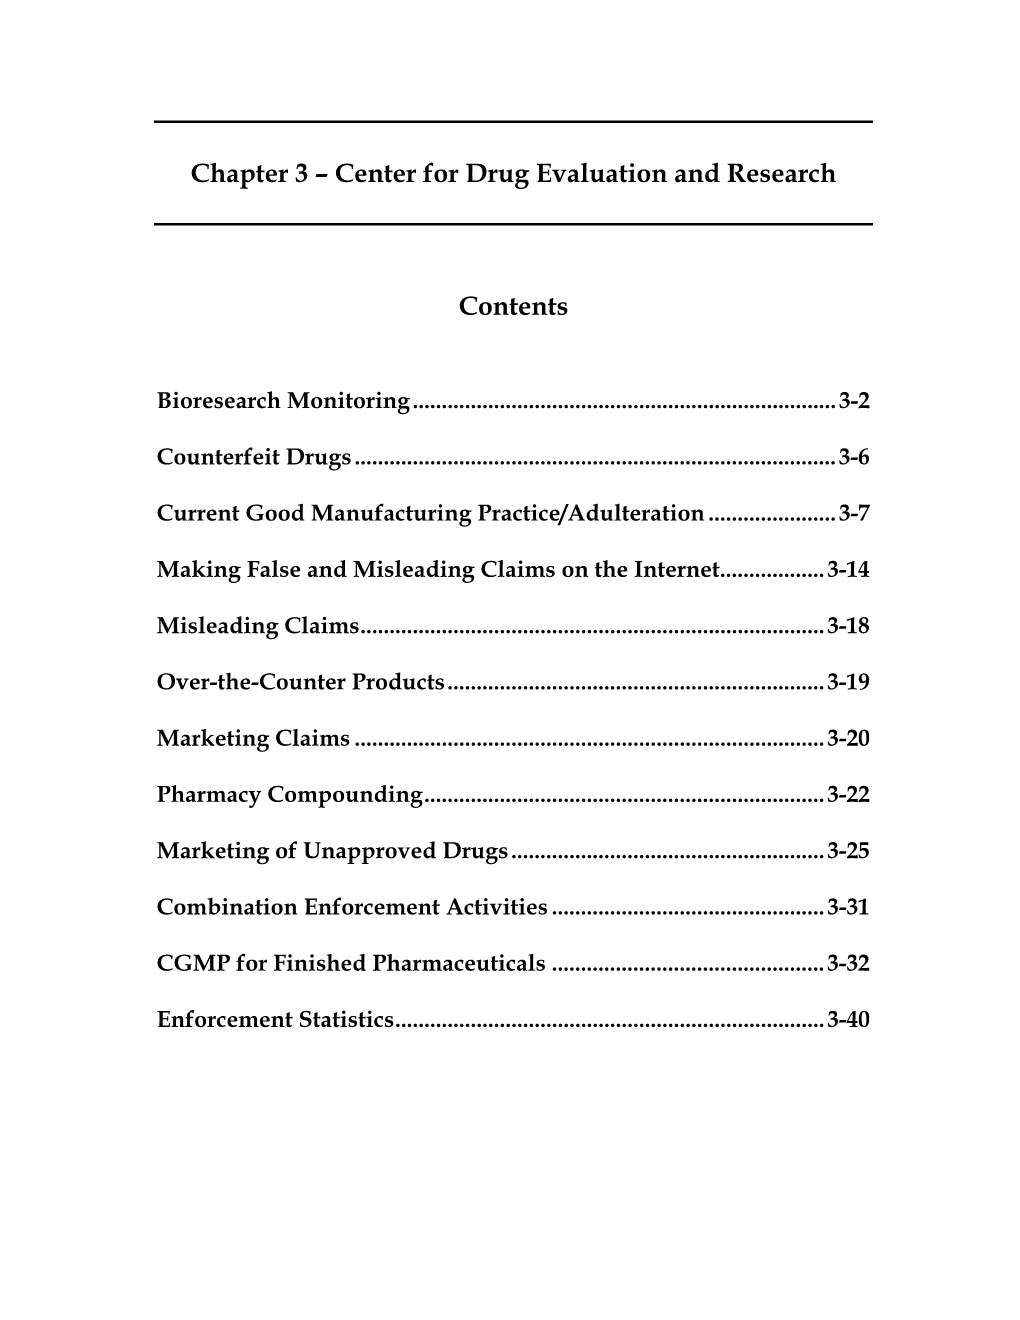 Chapter 3: Center for Drug Evaluation and Research (CDER)